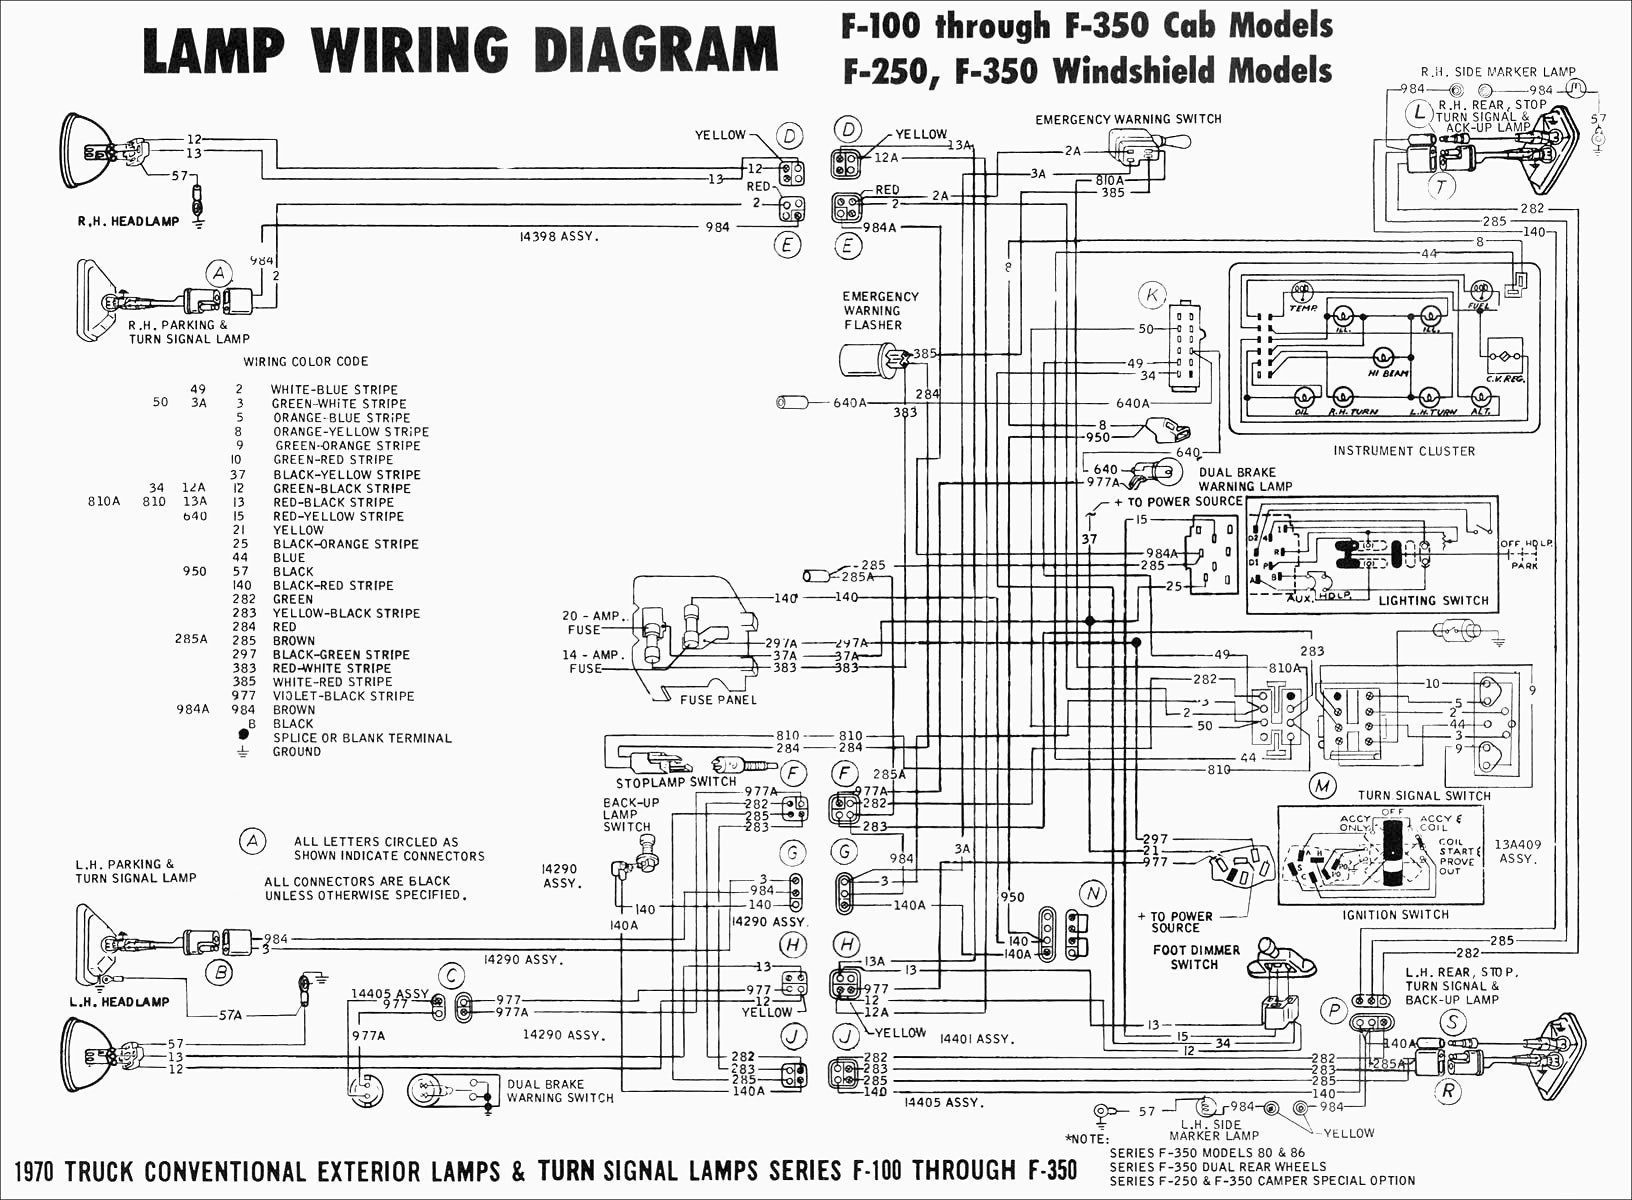 Wiring Diagram for Mtd Ignition Switch Fresh Wiring Diagram Amplifier Archives Joescablecar Fresh Wiring